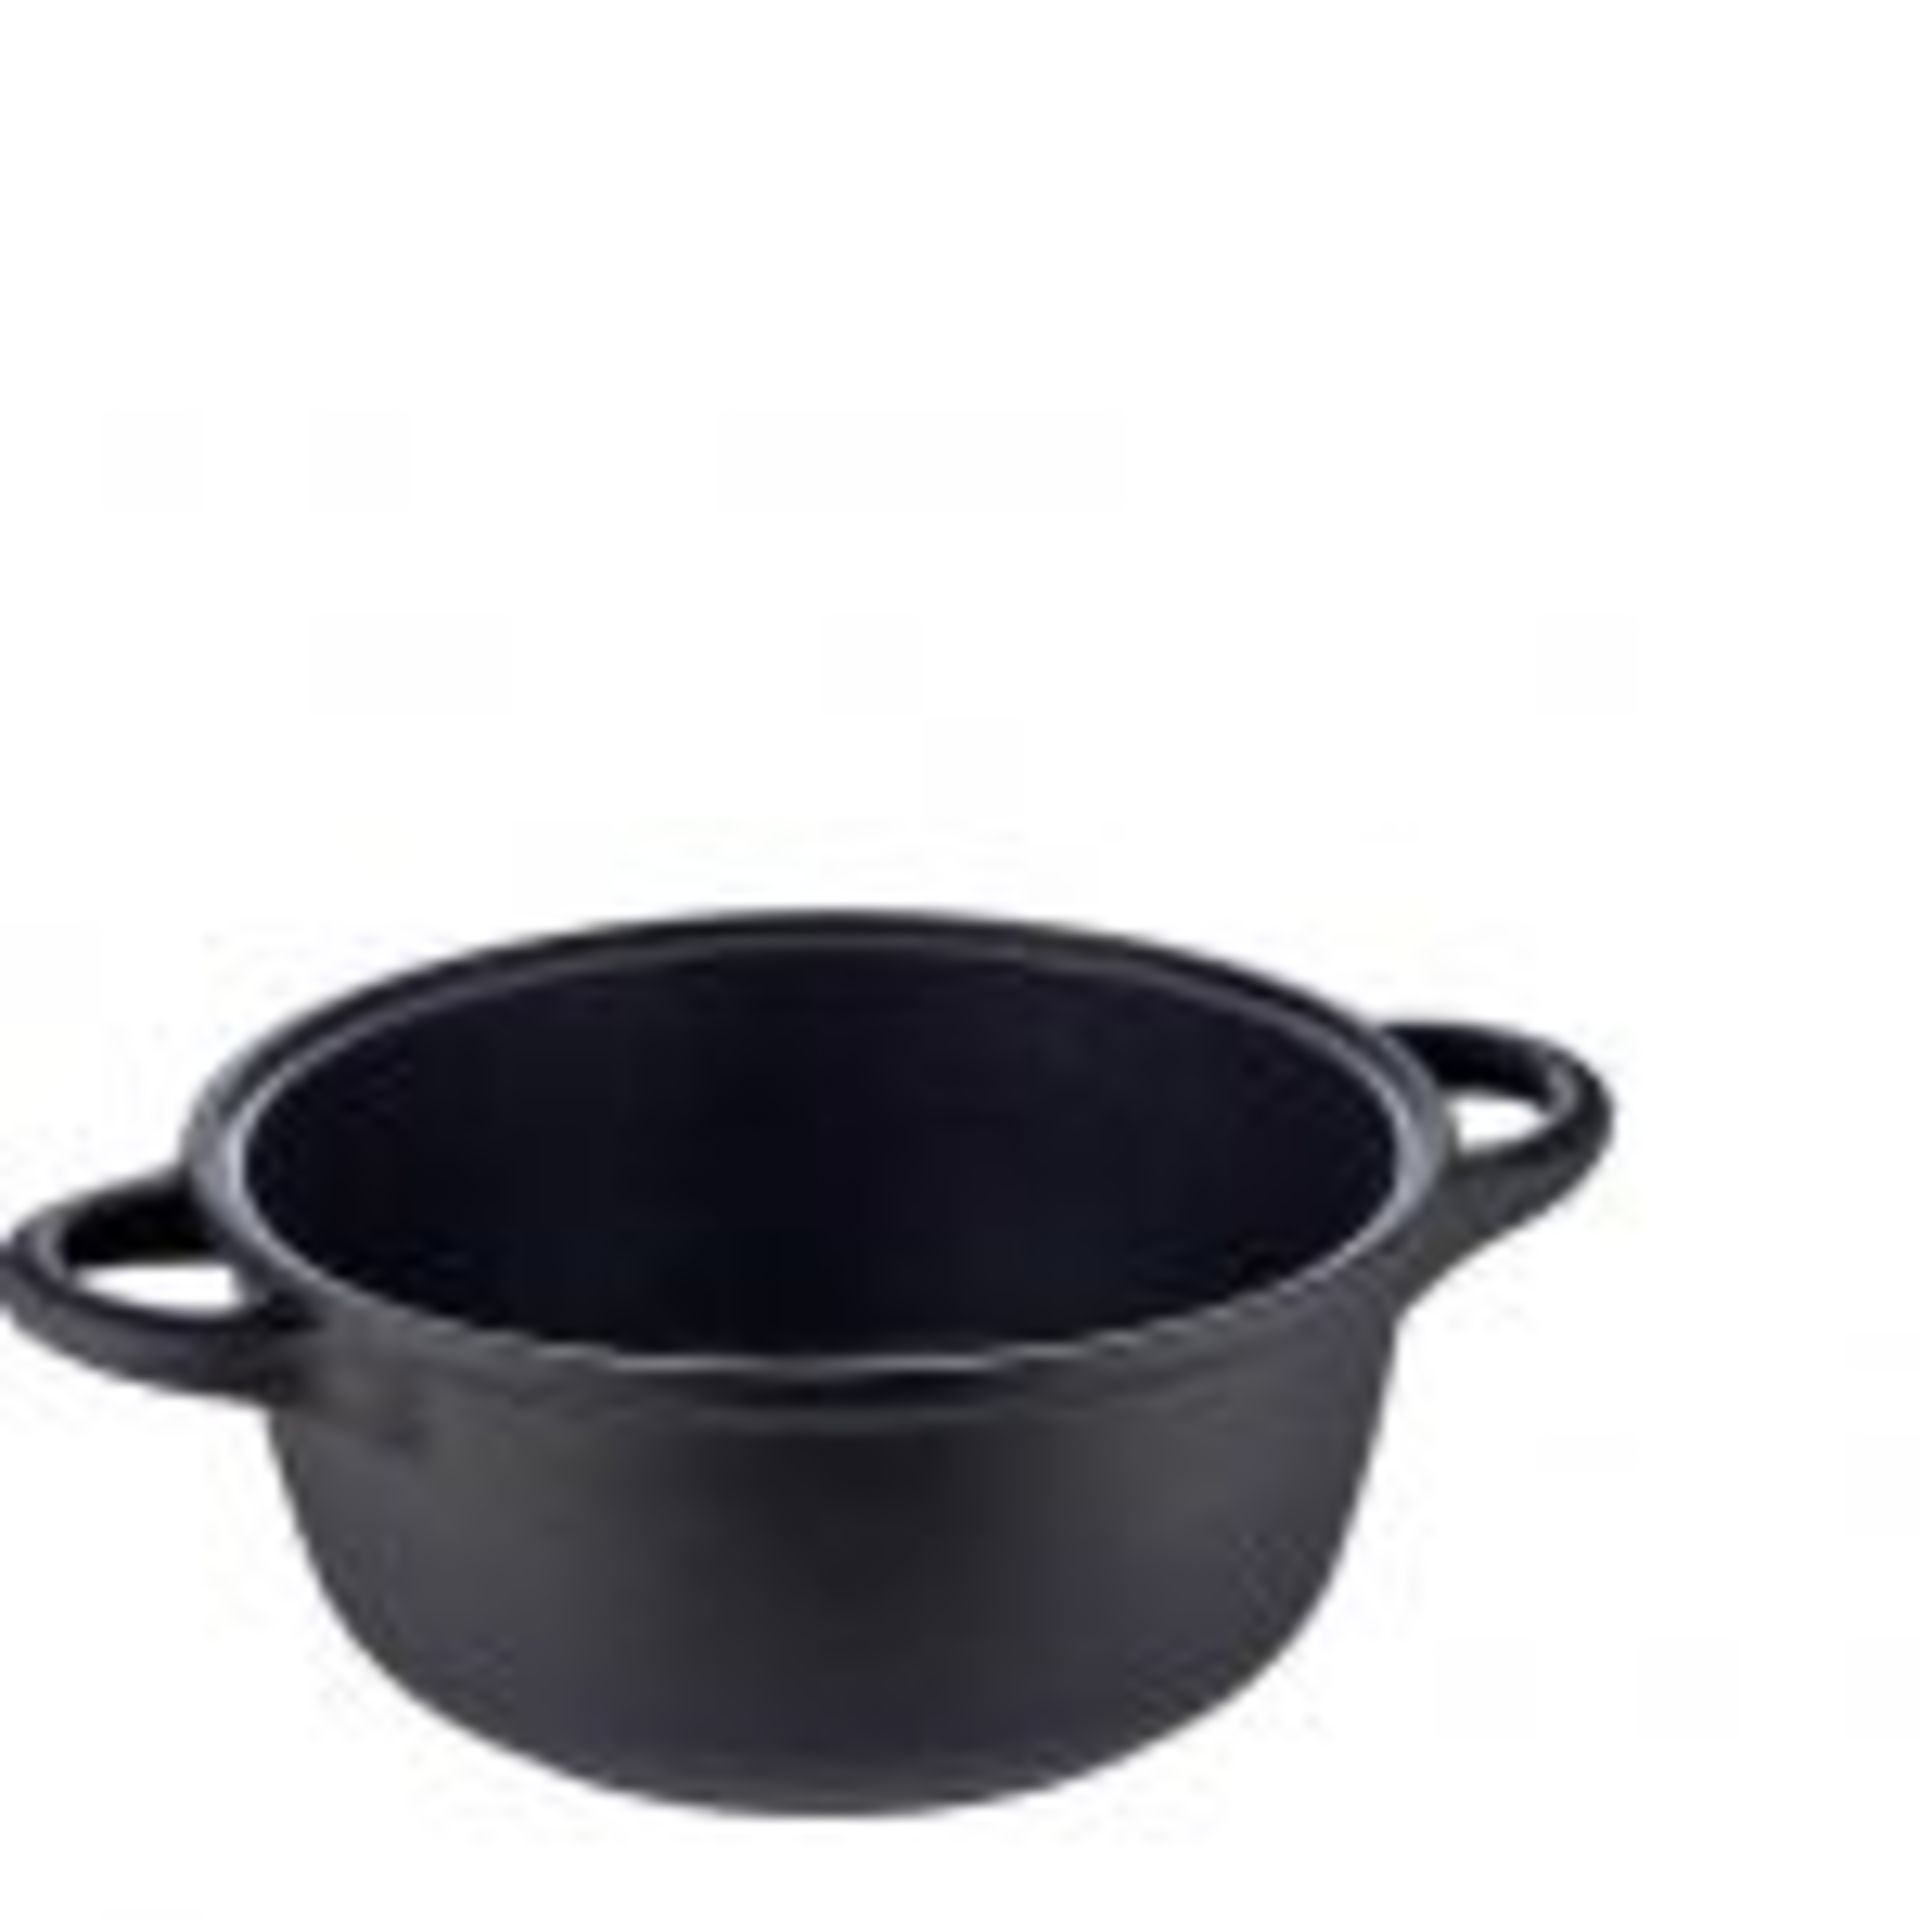 Crafond 28cm Stockpot twin handle with lid- non stick.